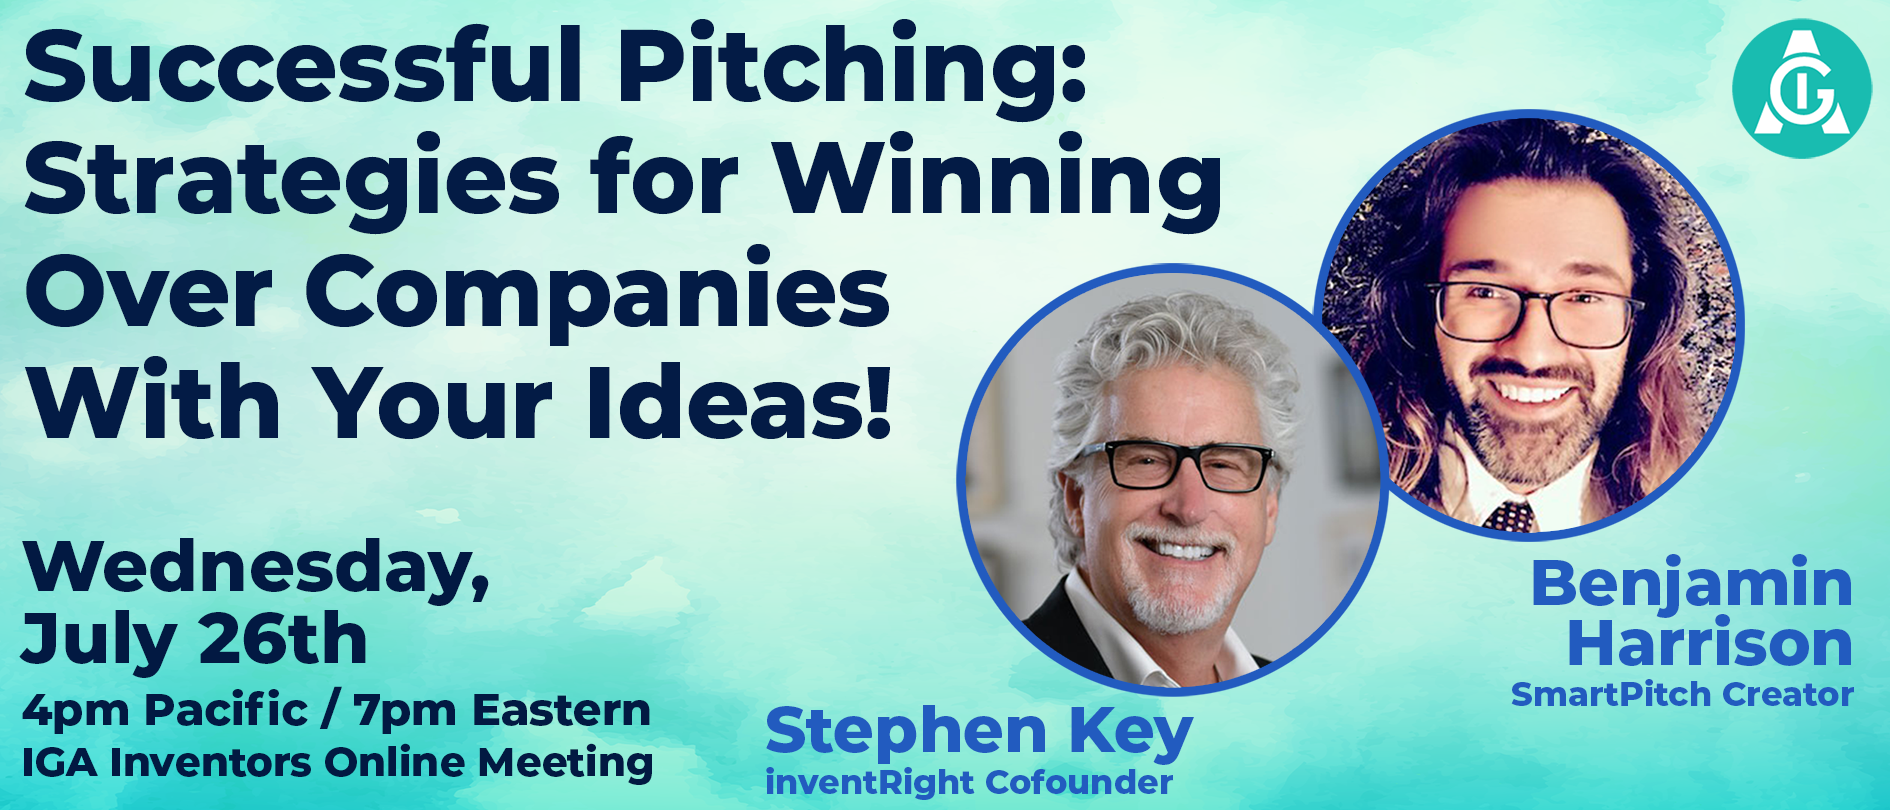 <h3><strong>Successful Pitching: Strategies for Winning Over Companies with your Ideas!</strong></h3>